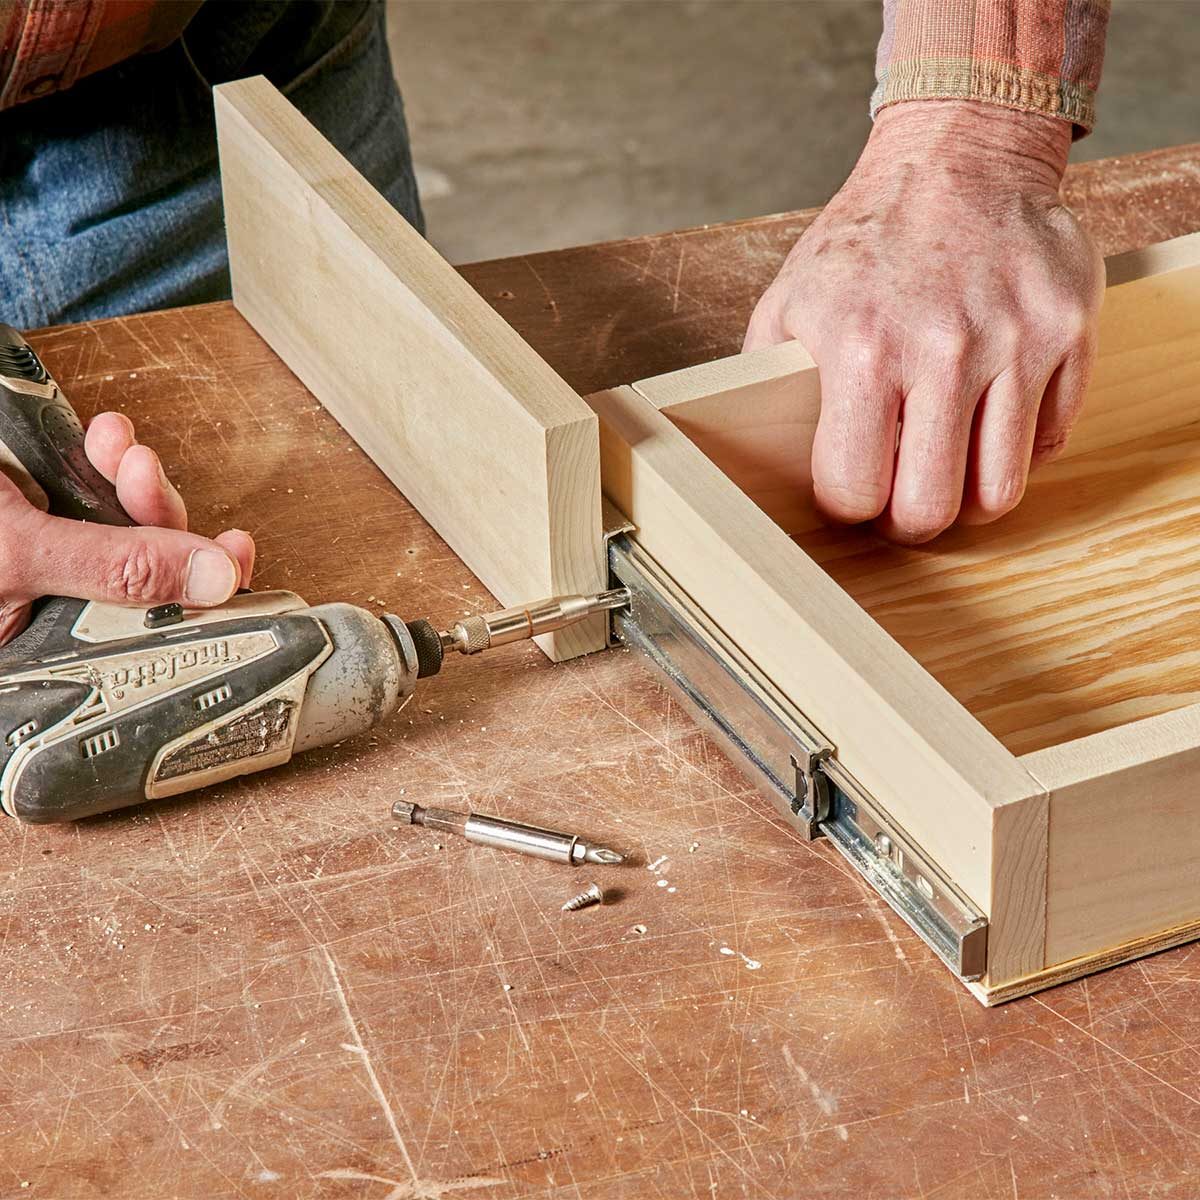 How To Build An Under Cabinet Drawer The Family Handyman